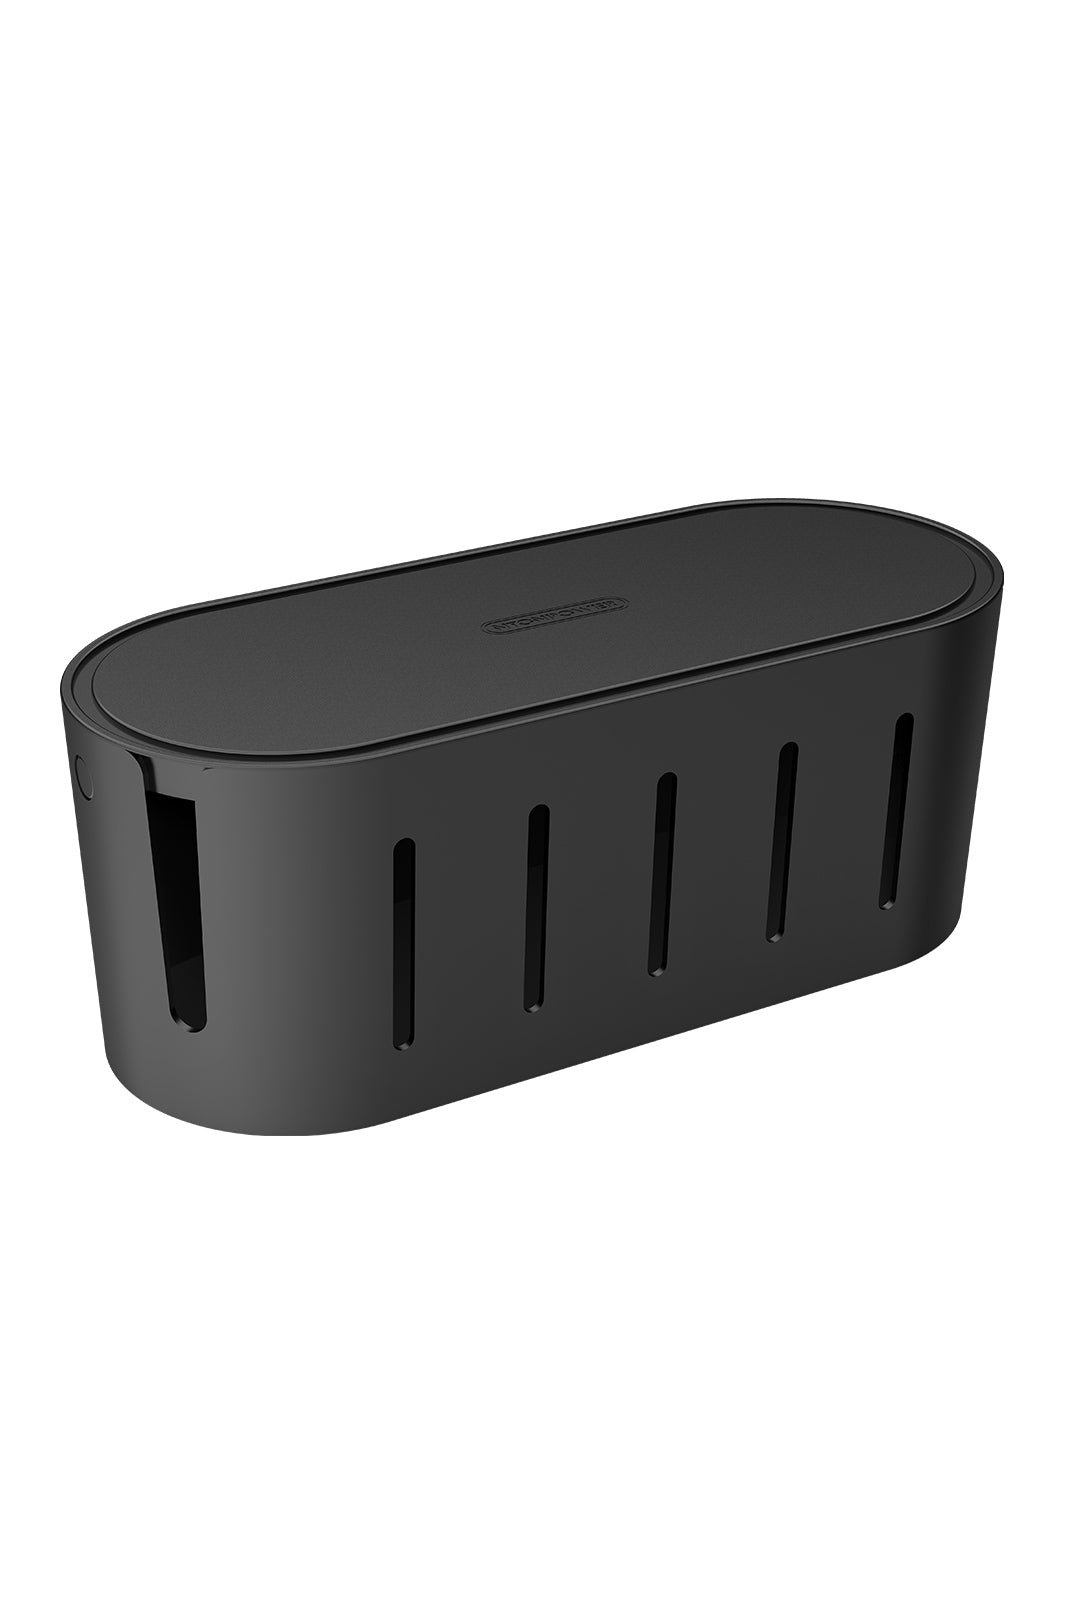 Ntonpower Cable Organizer Box Wall Mountable with Lock Lid